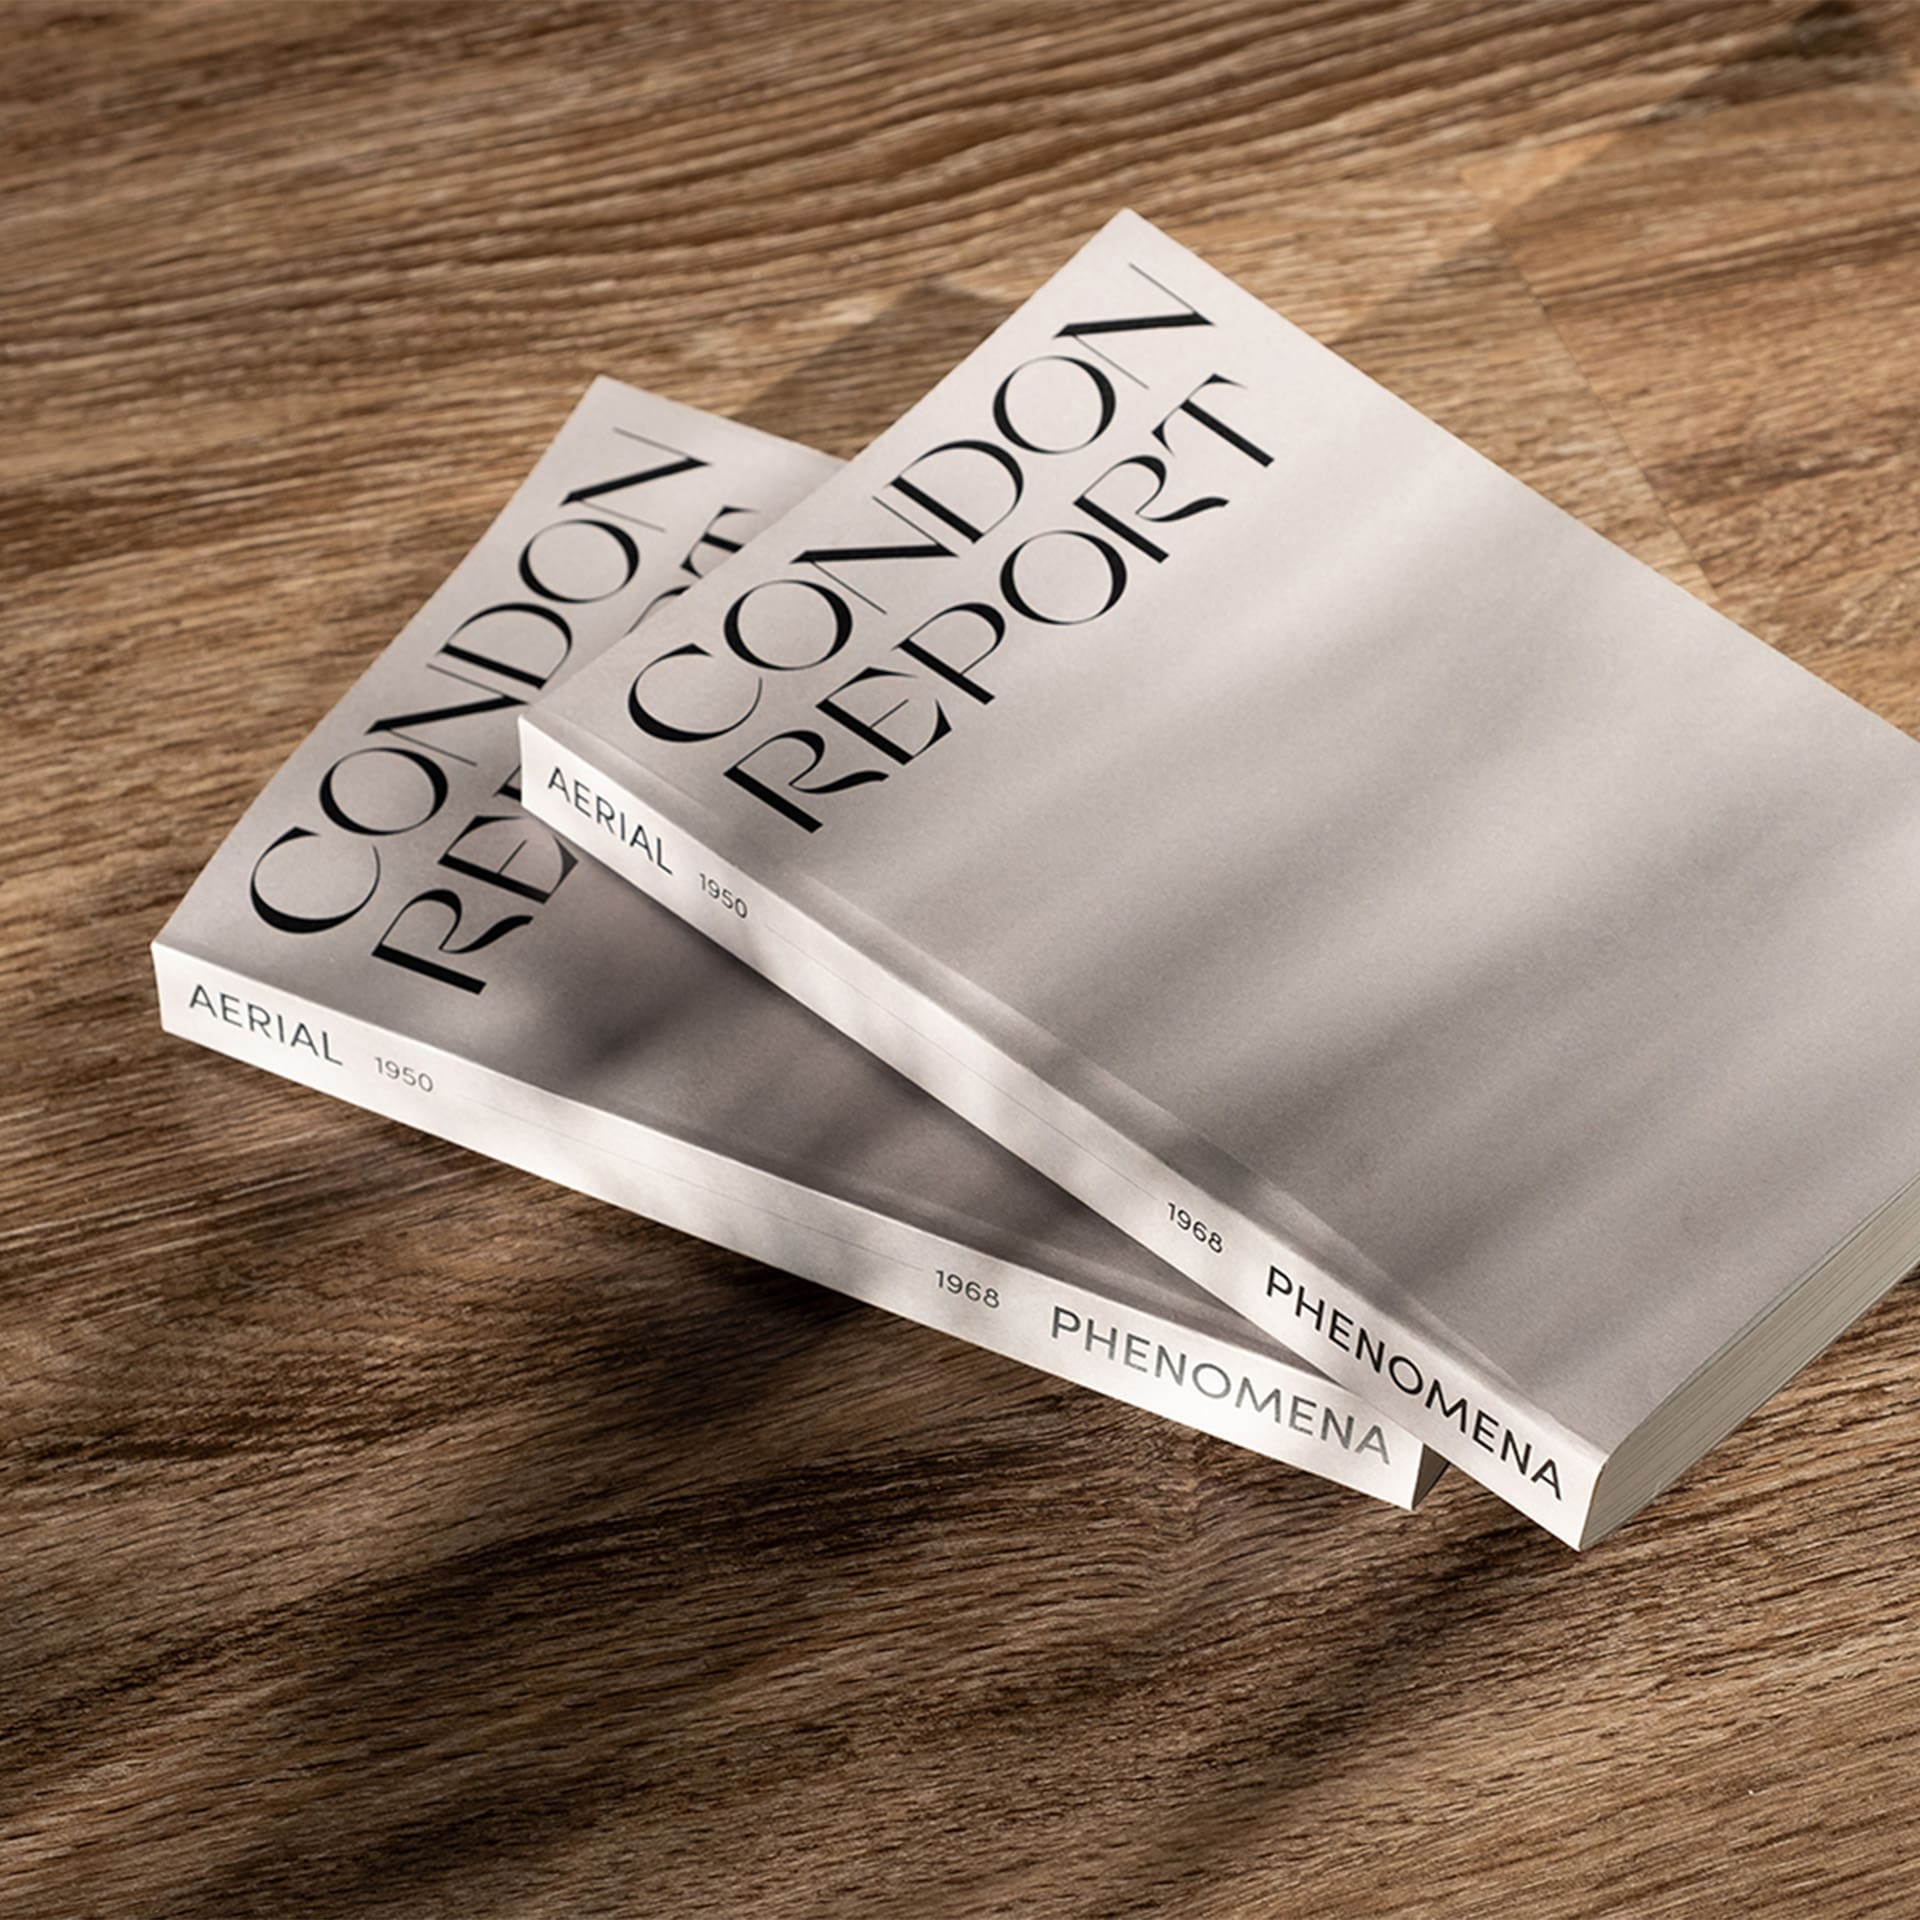 Photo of two identical books laying on a wooden table. The books are white, with a large black stylized title at the top that says "Condon Report".